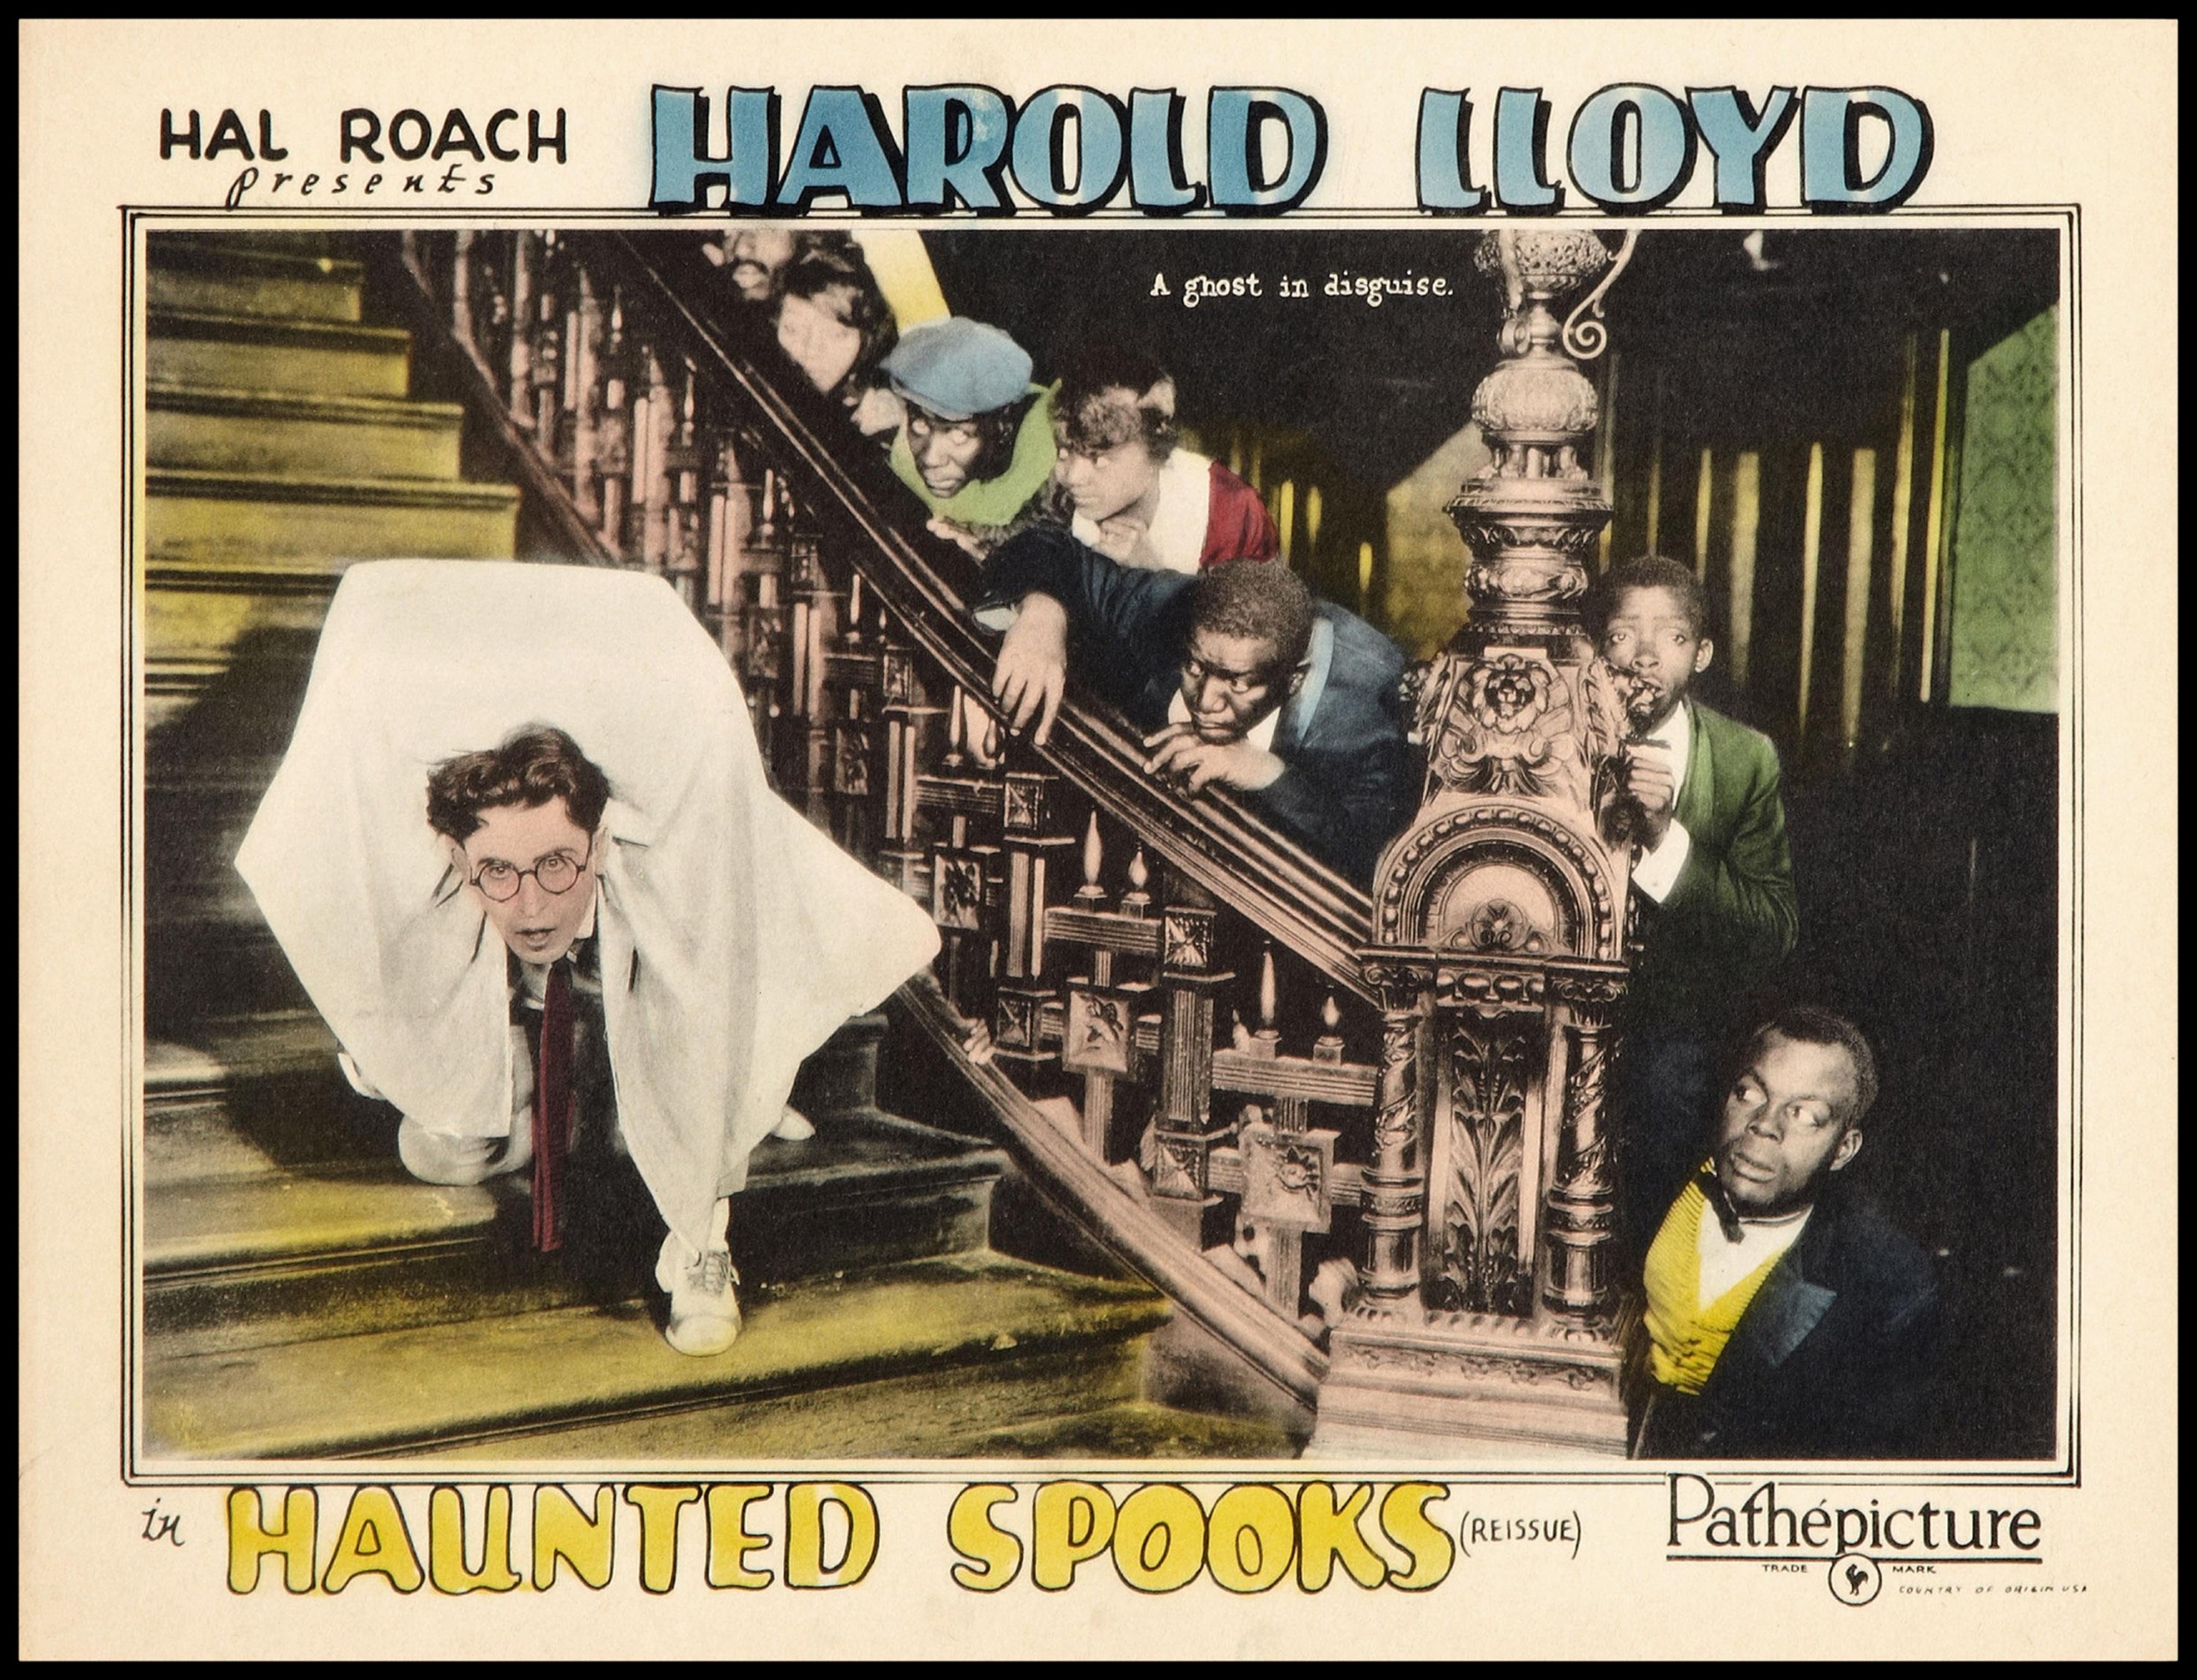 Haunted Spooks (1920) reissue lobby card – A ghost in disguise – featuring Harold Lloyd (as the Boy) tangled in bed sheet and Edgar Blue (as the Butler) gazing from the foot of staircase.